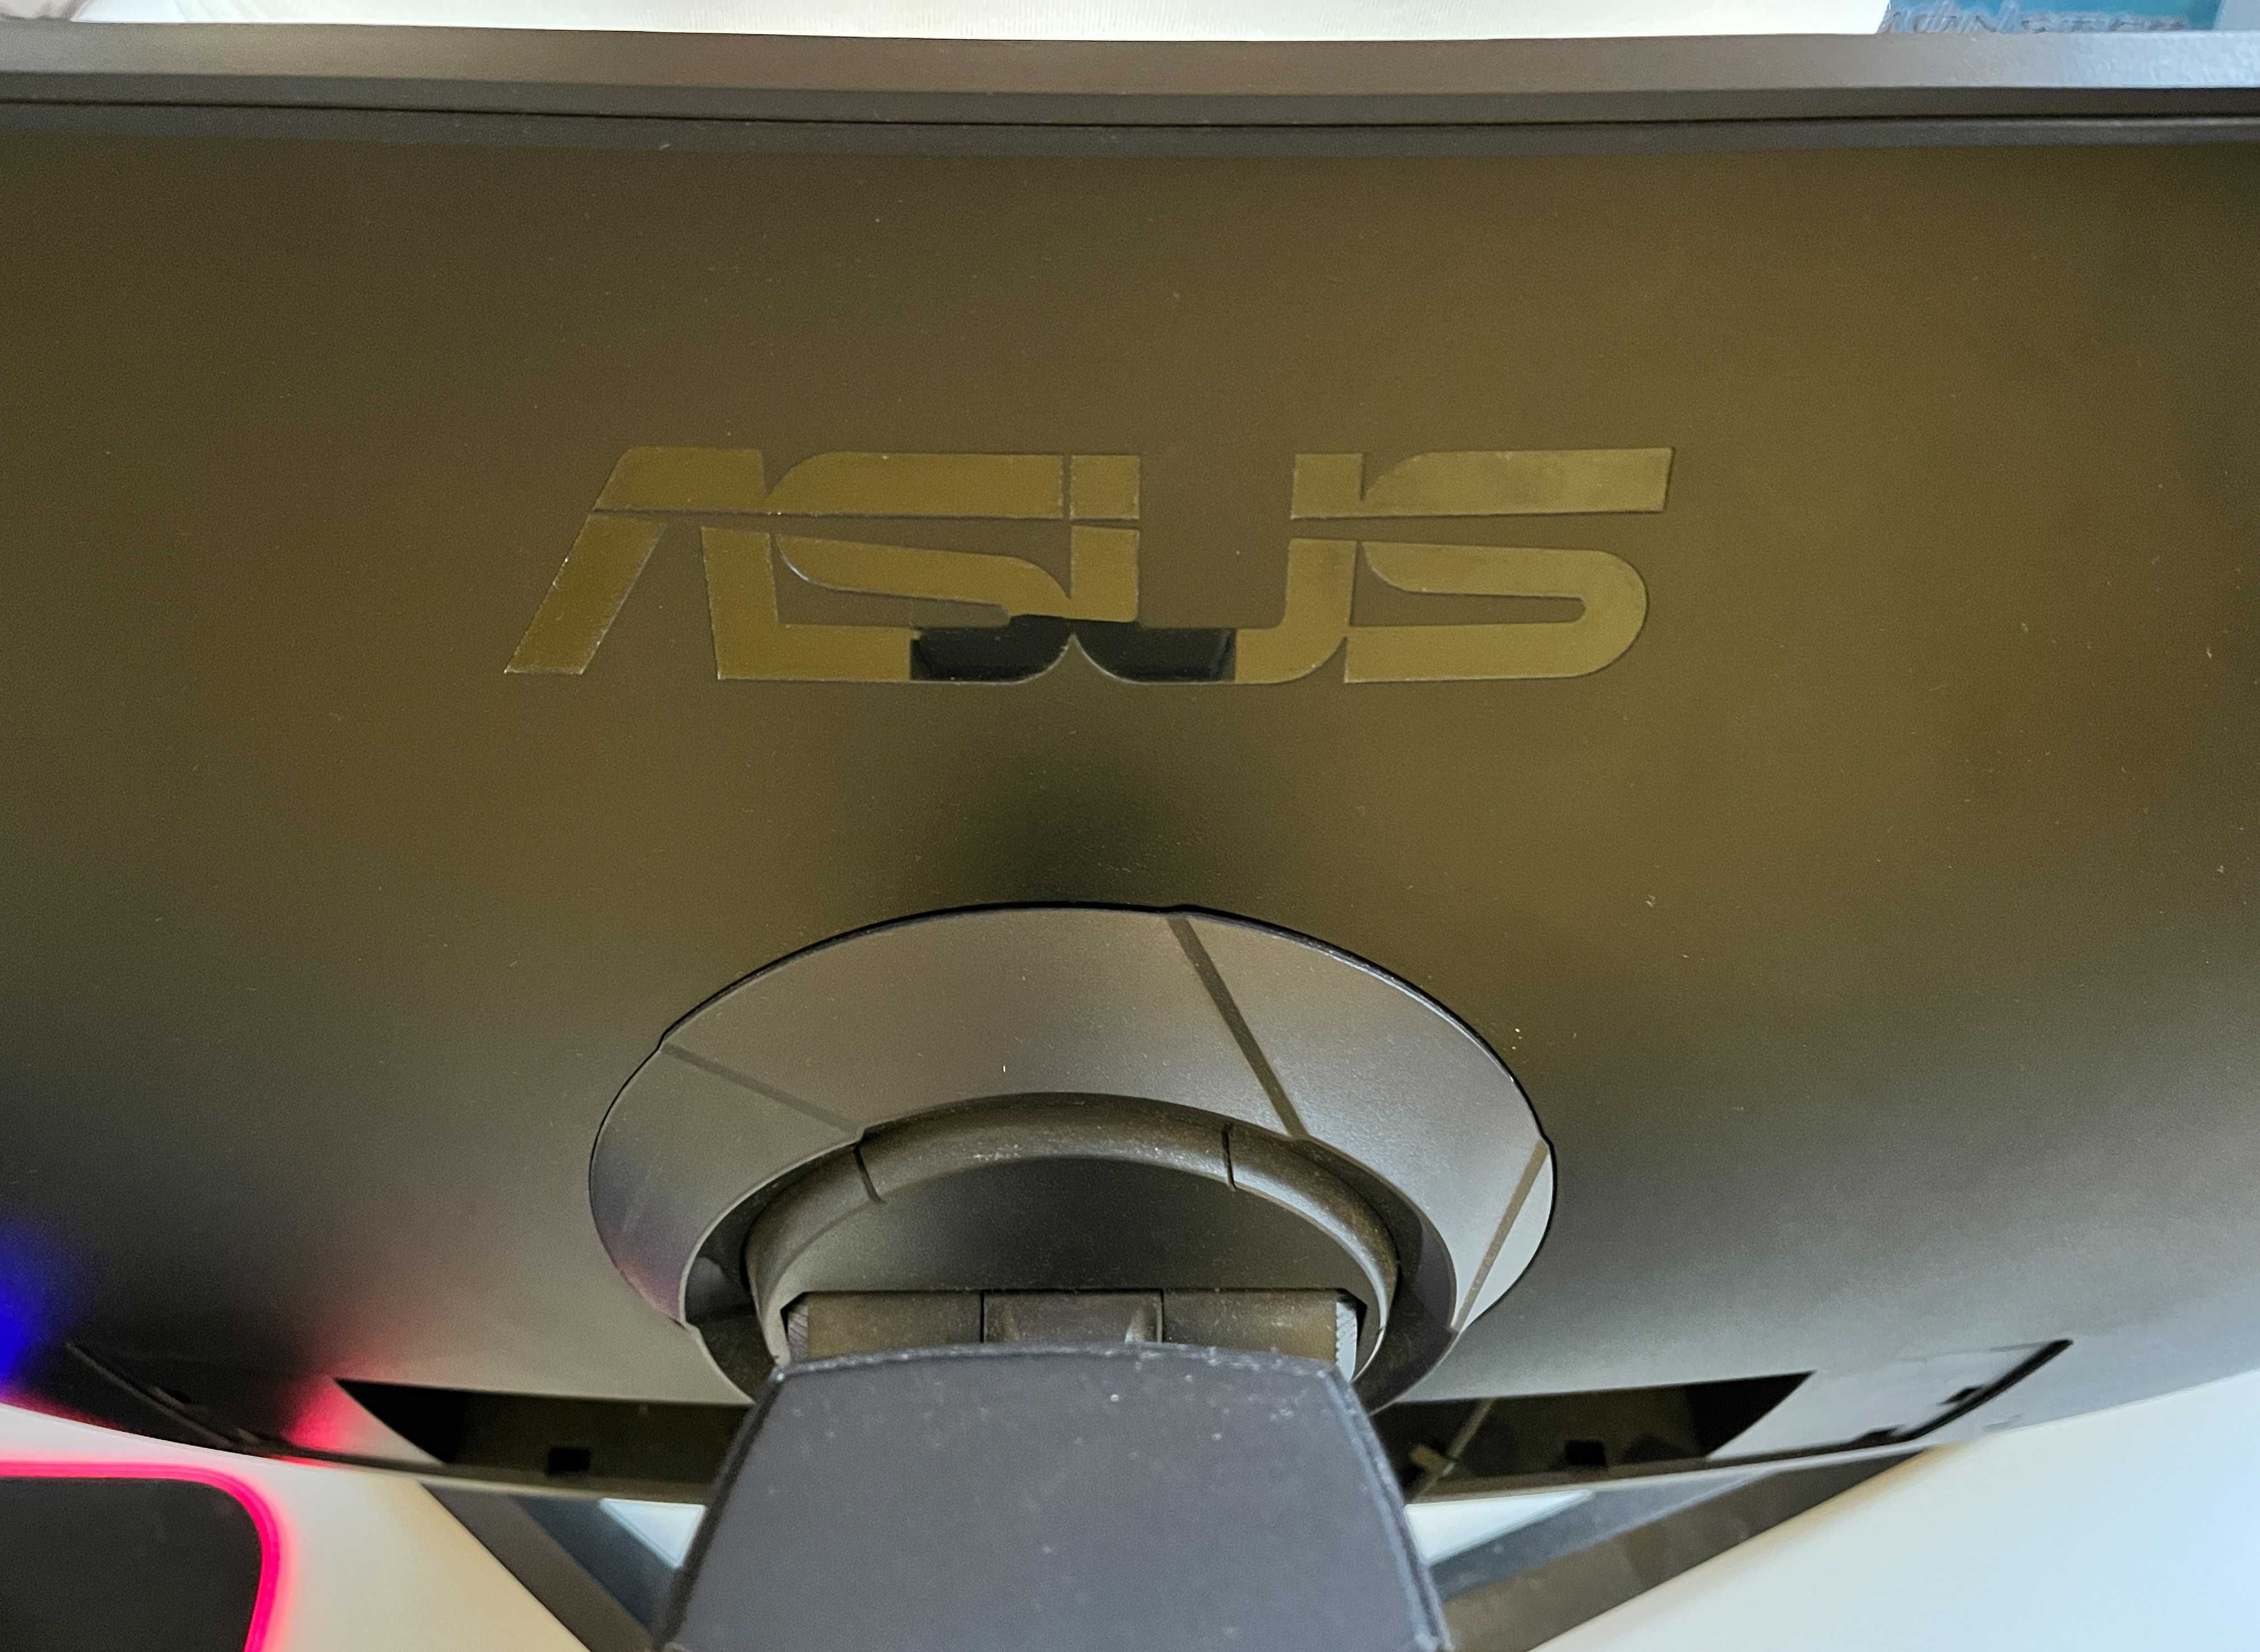 ASUS XG49VQ Curved